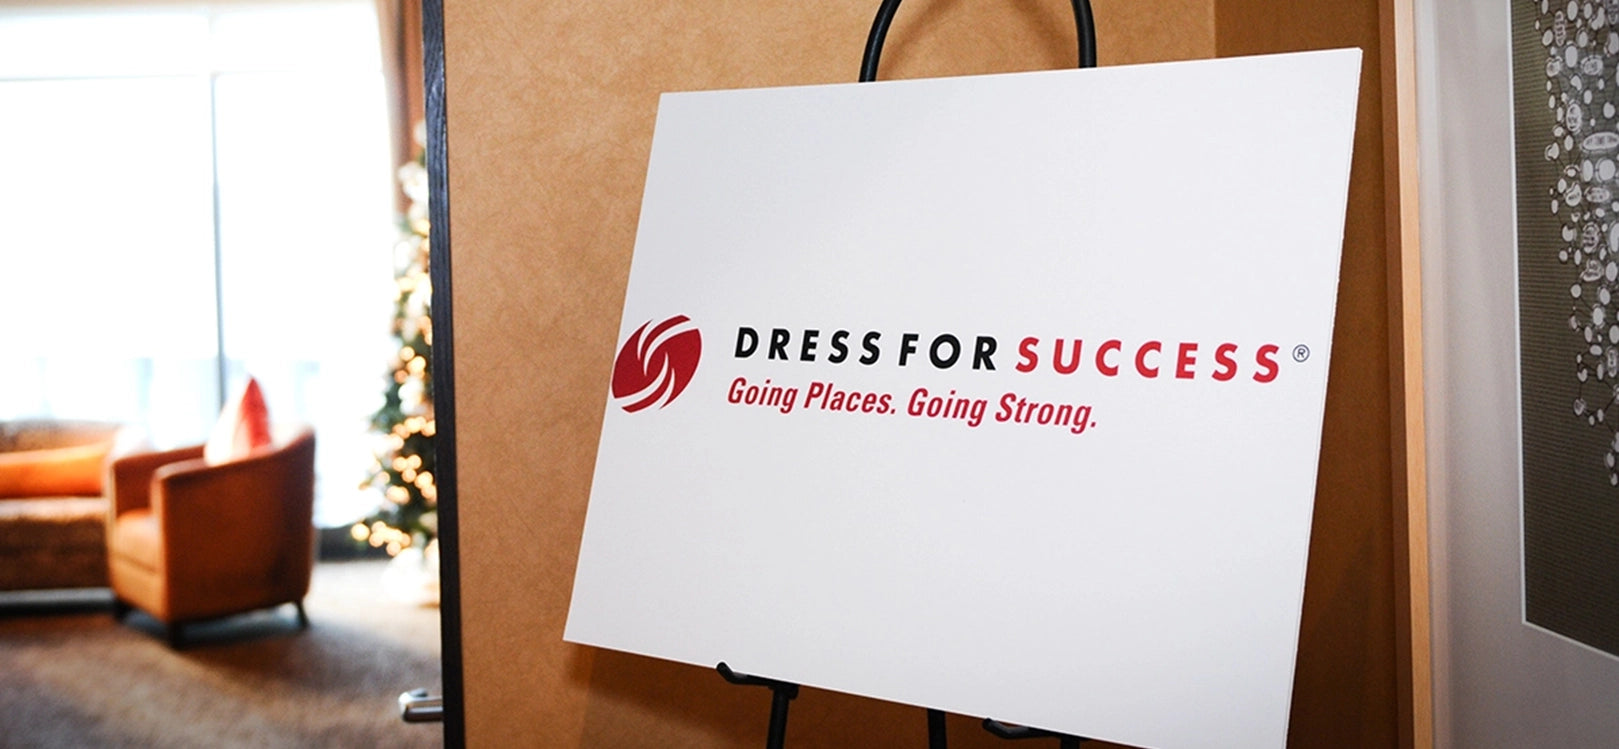 Conference room with white sign that says "Dress For Success | Going Places. Going Strong" in red text